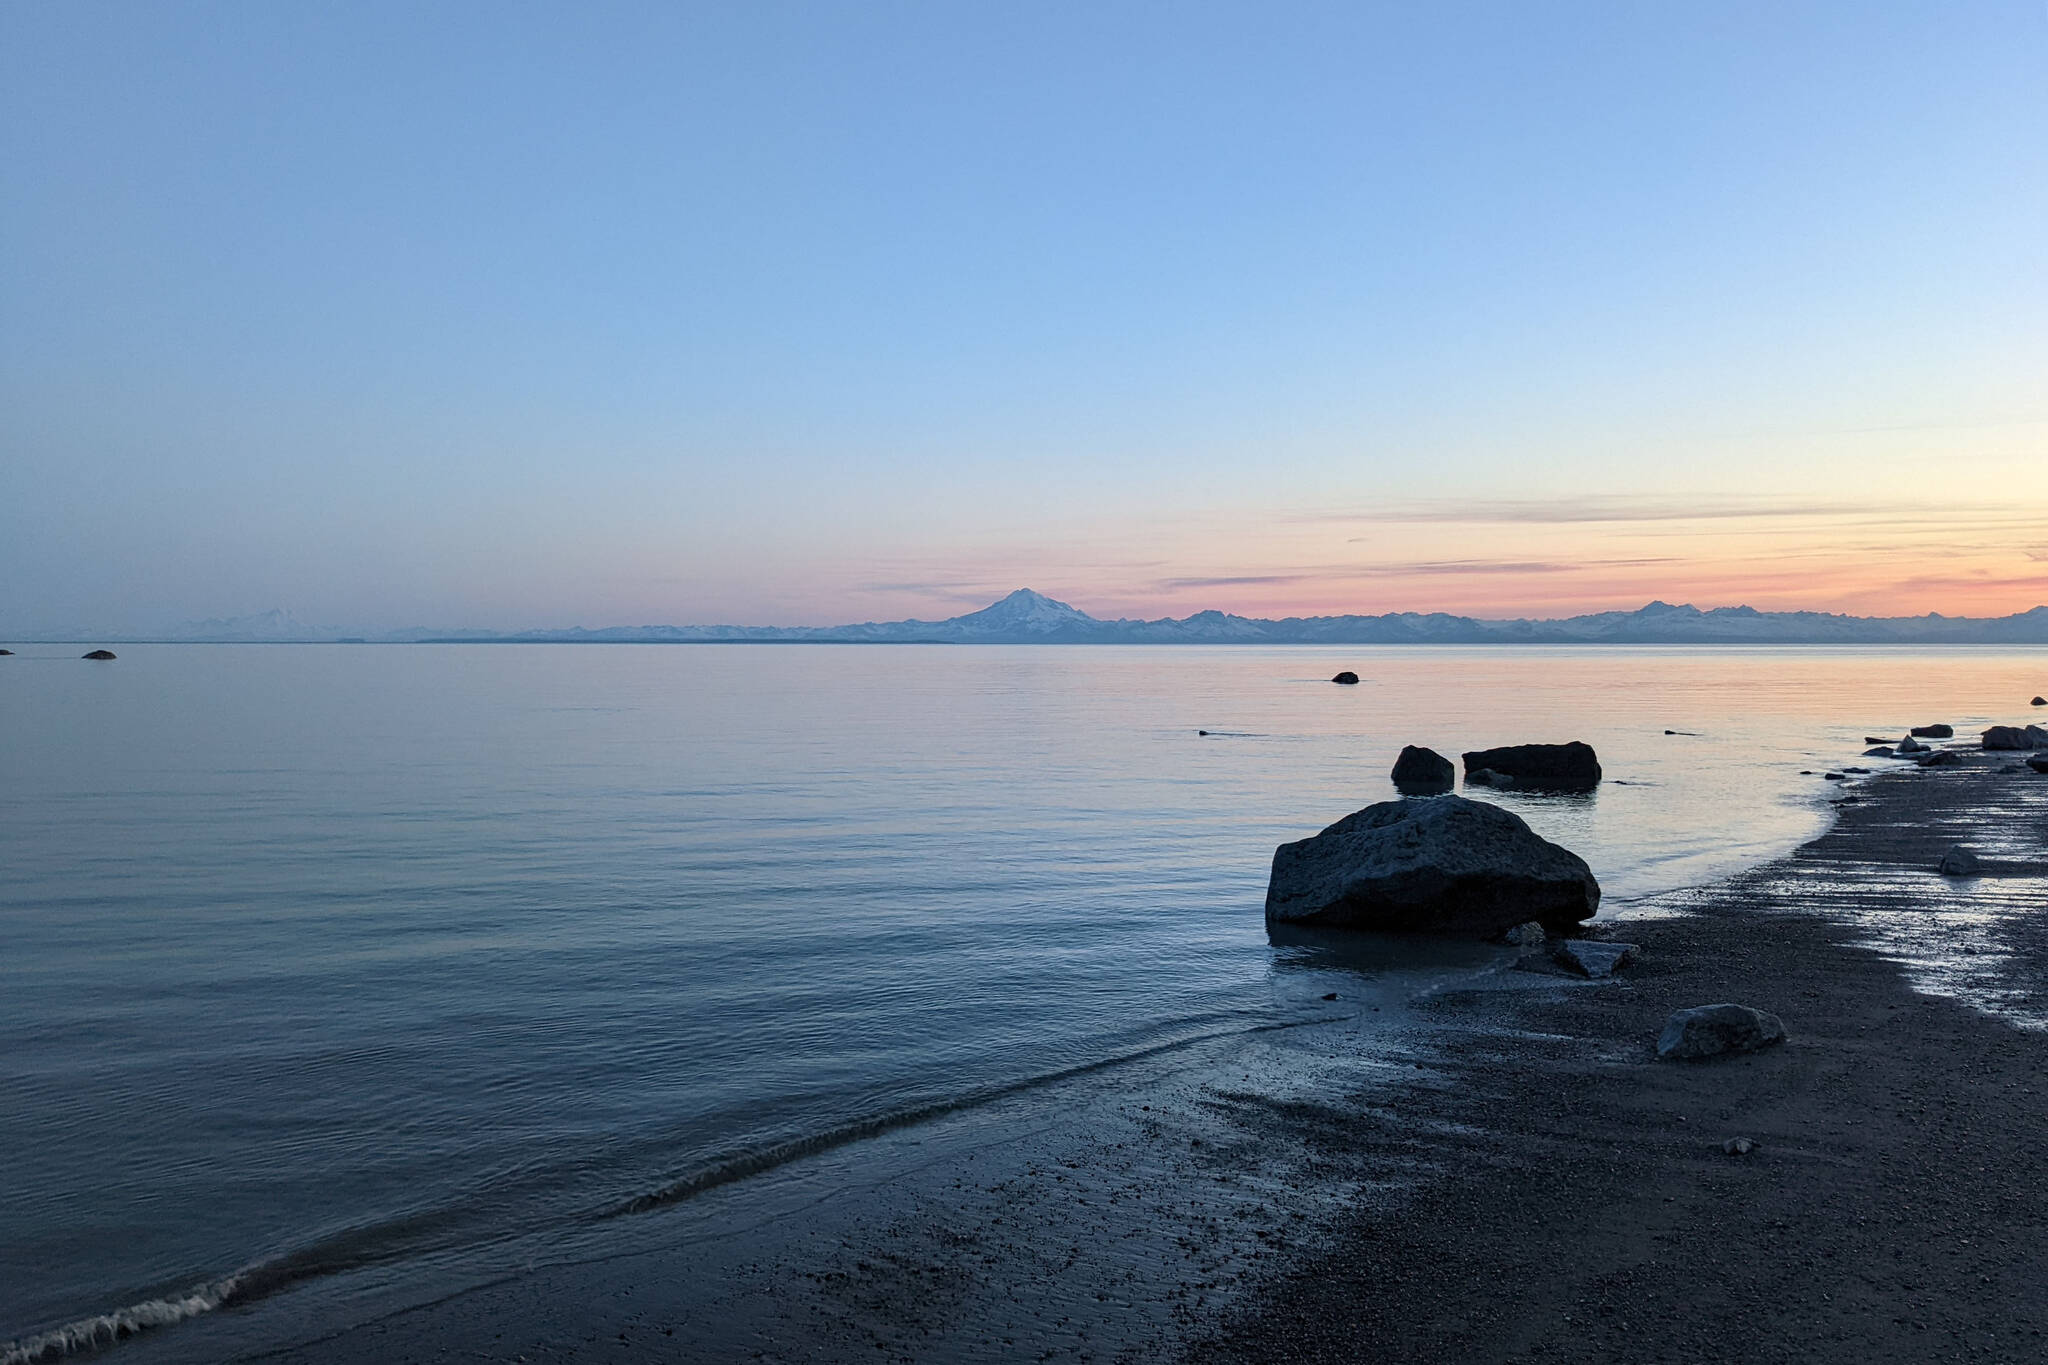 Mount Redoubt can be seen acoss Cook Inlet from North Kenai Beach on Thursday, July 2, 2022. (Photo by Erin Thompson/Peninsula Clarion)